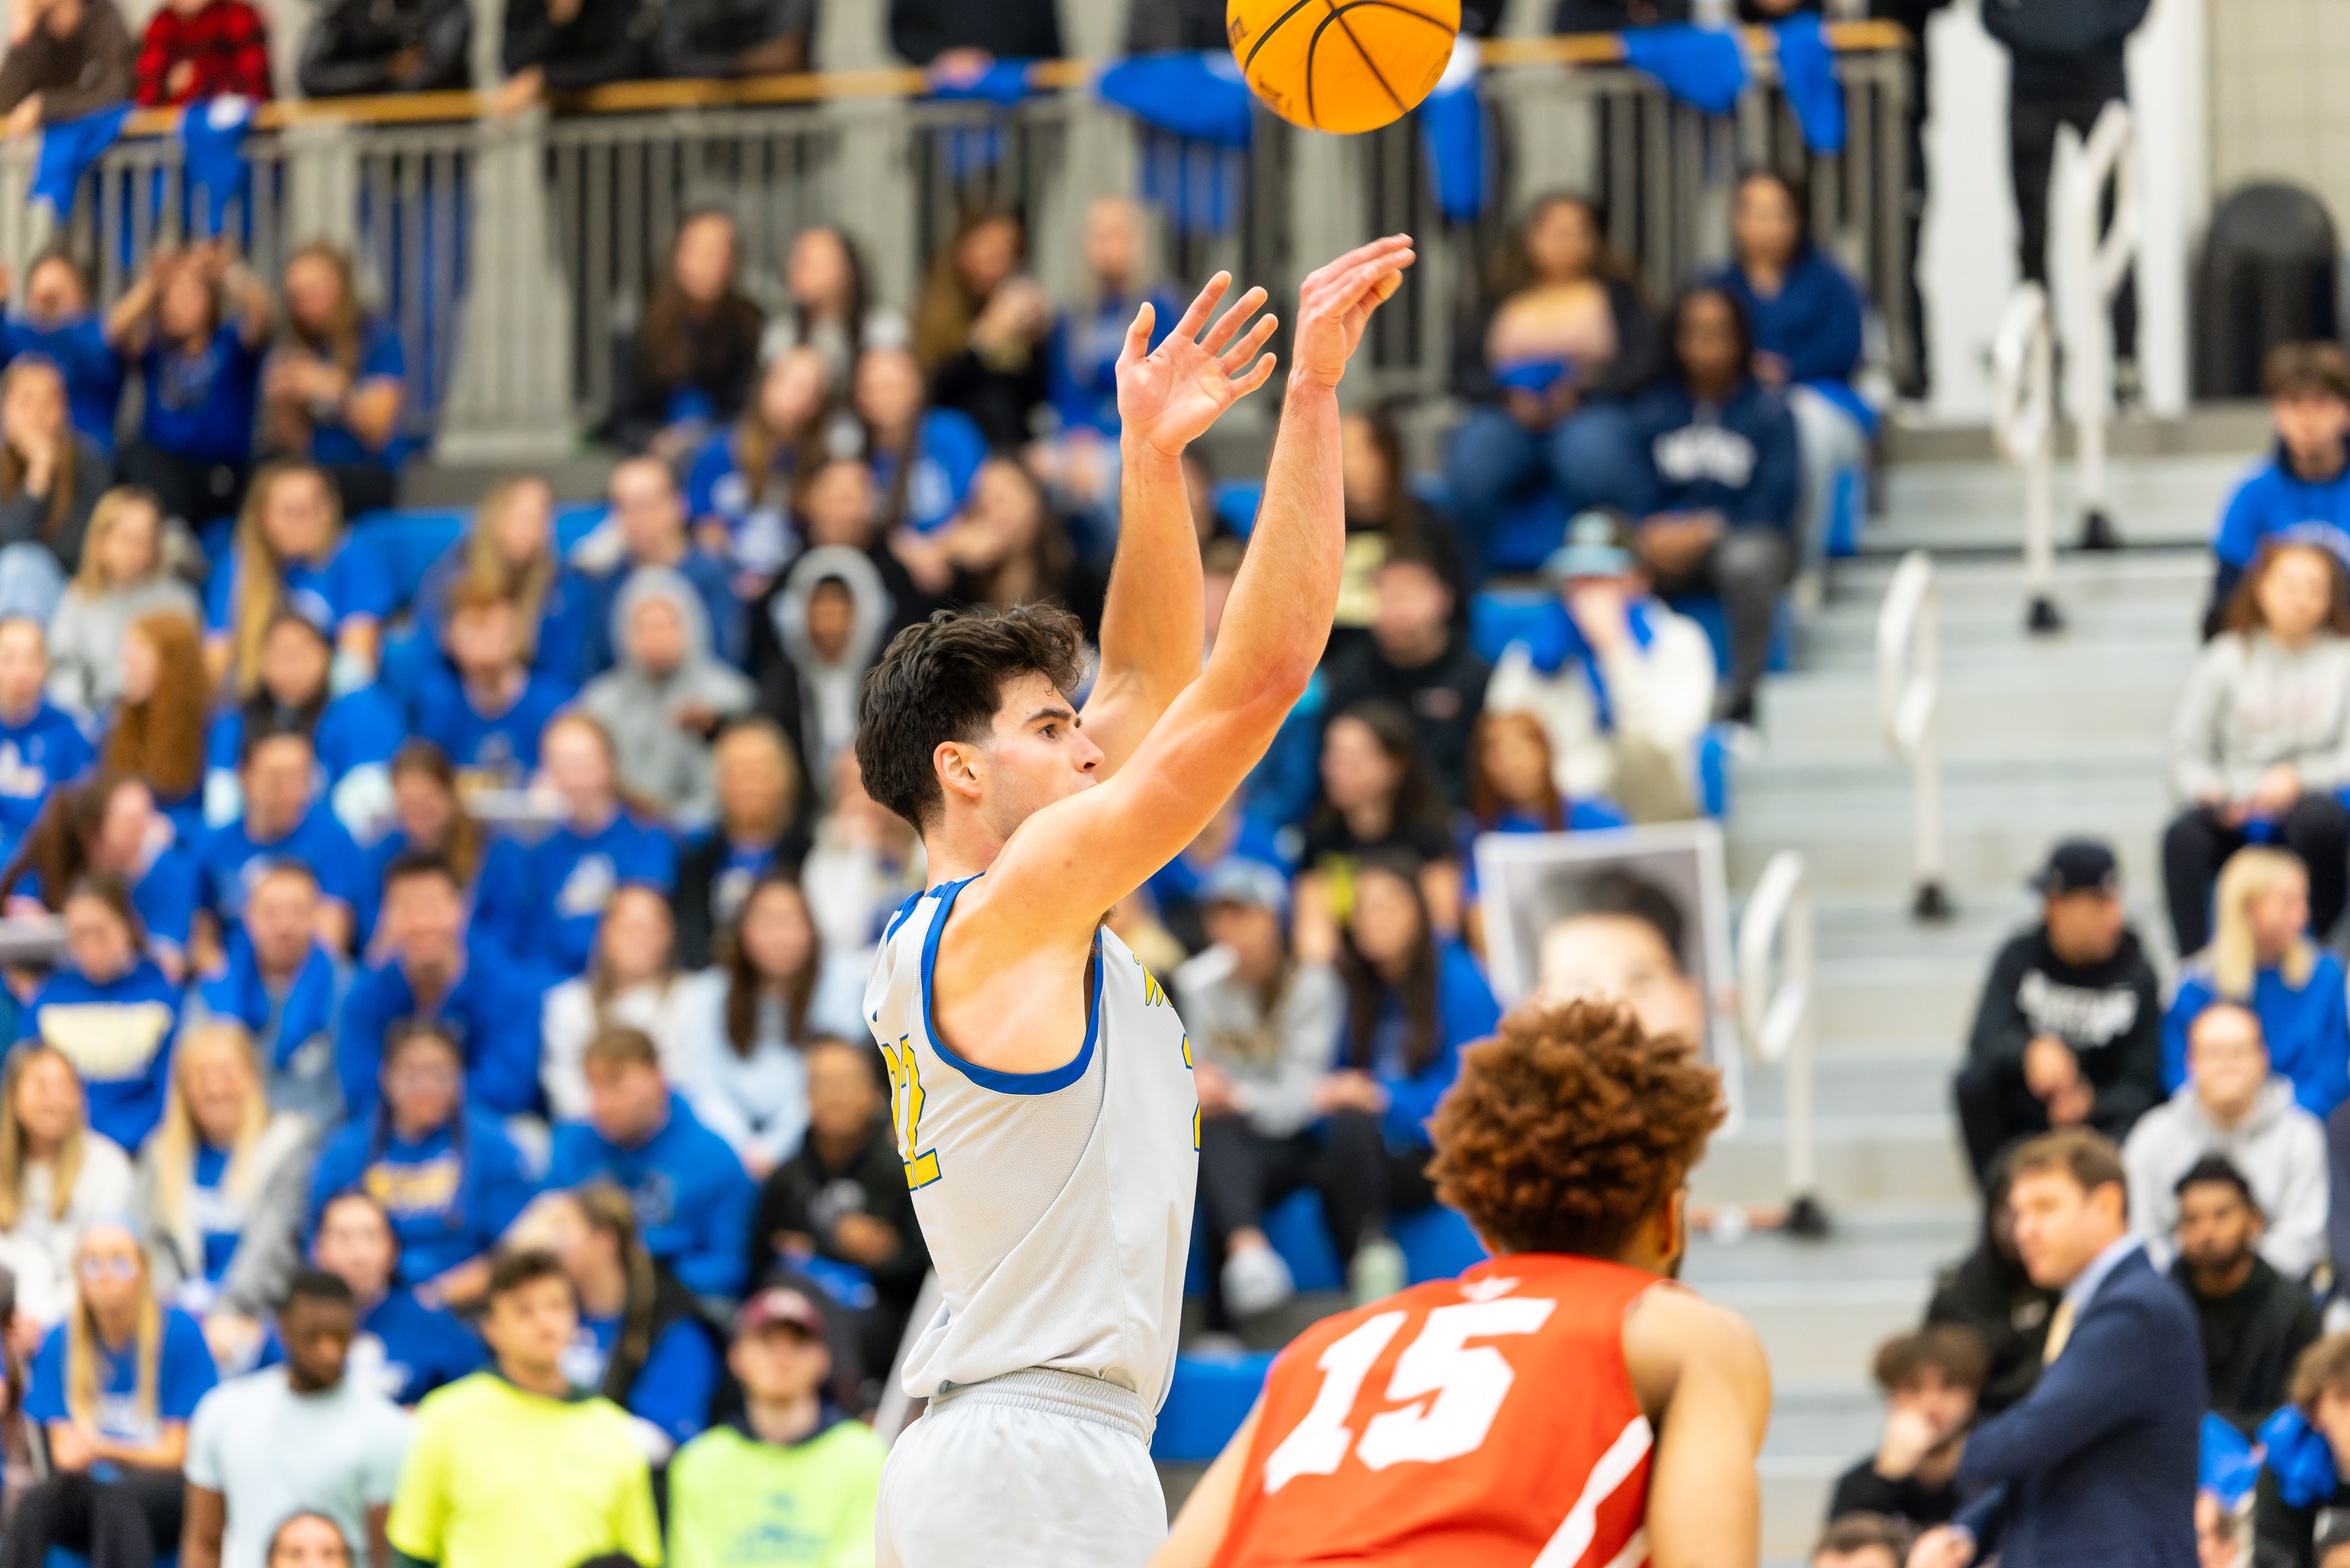 Rubenskas Leads Lancers, Records 1000th Career Point in Victory over Falcons